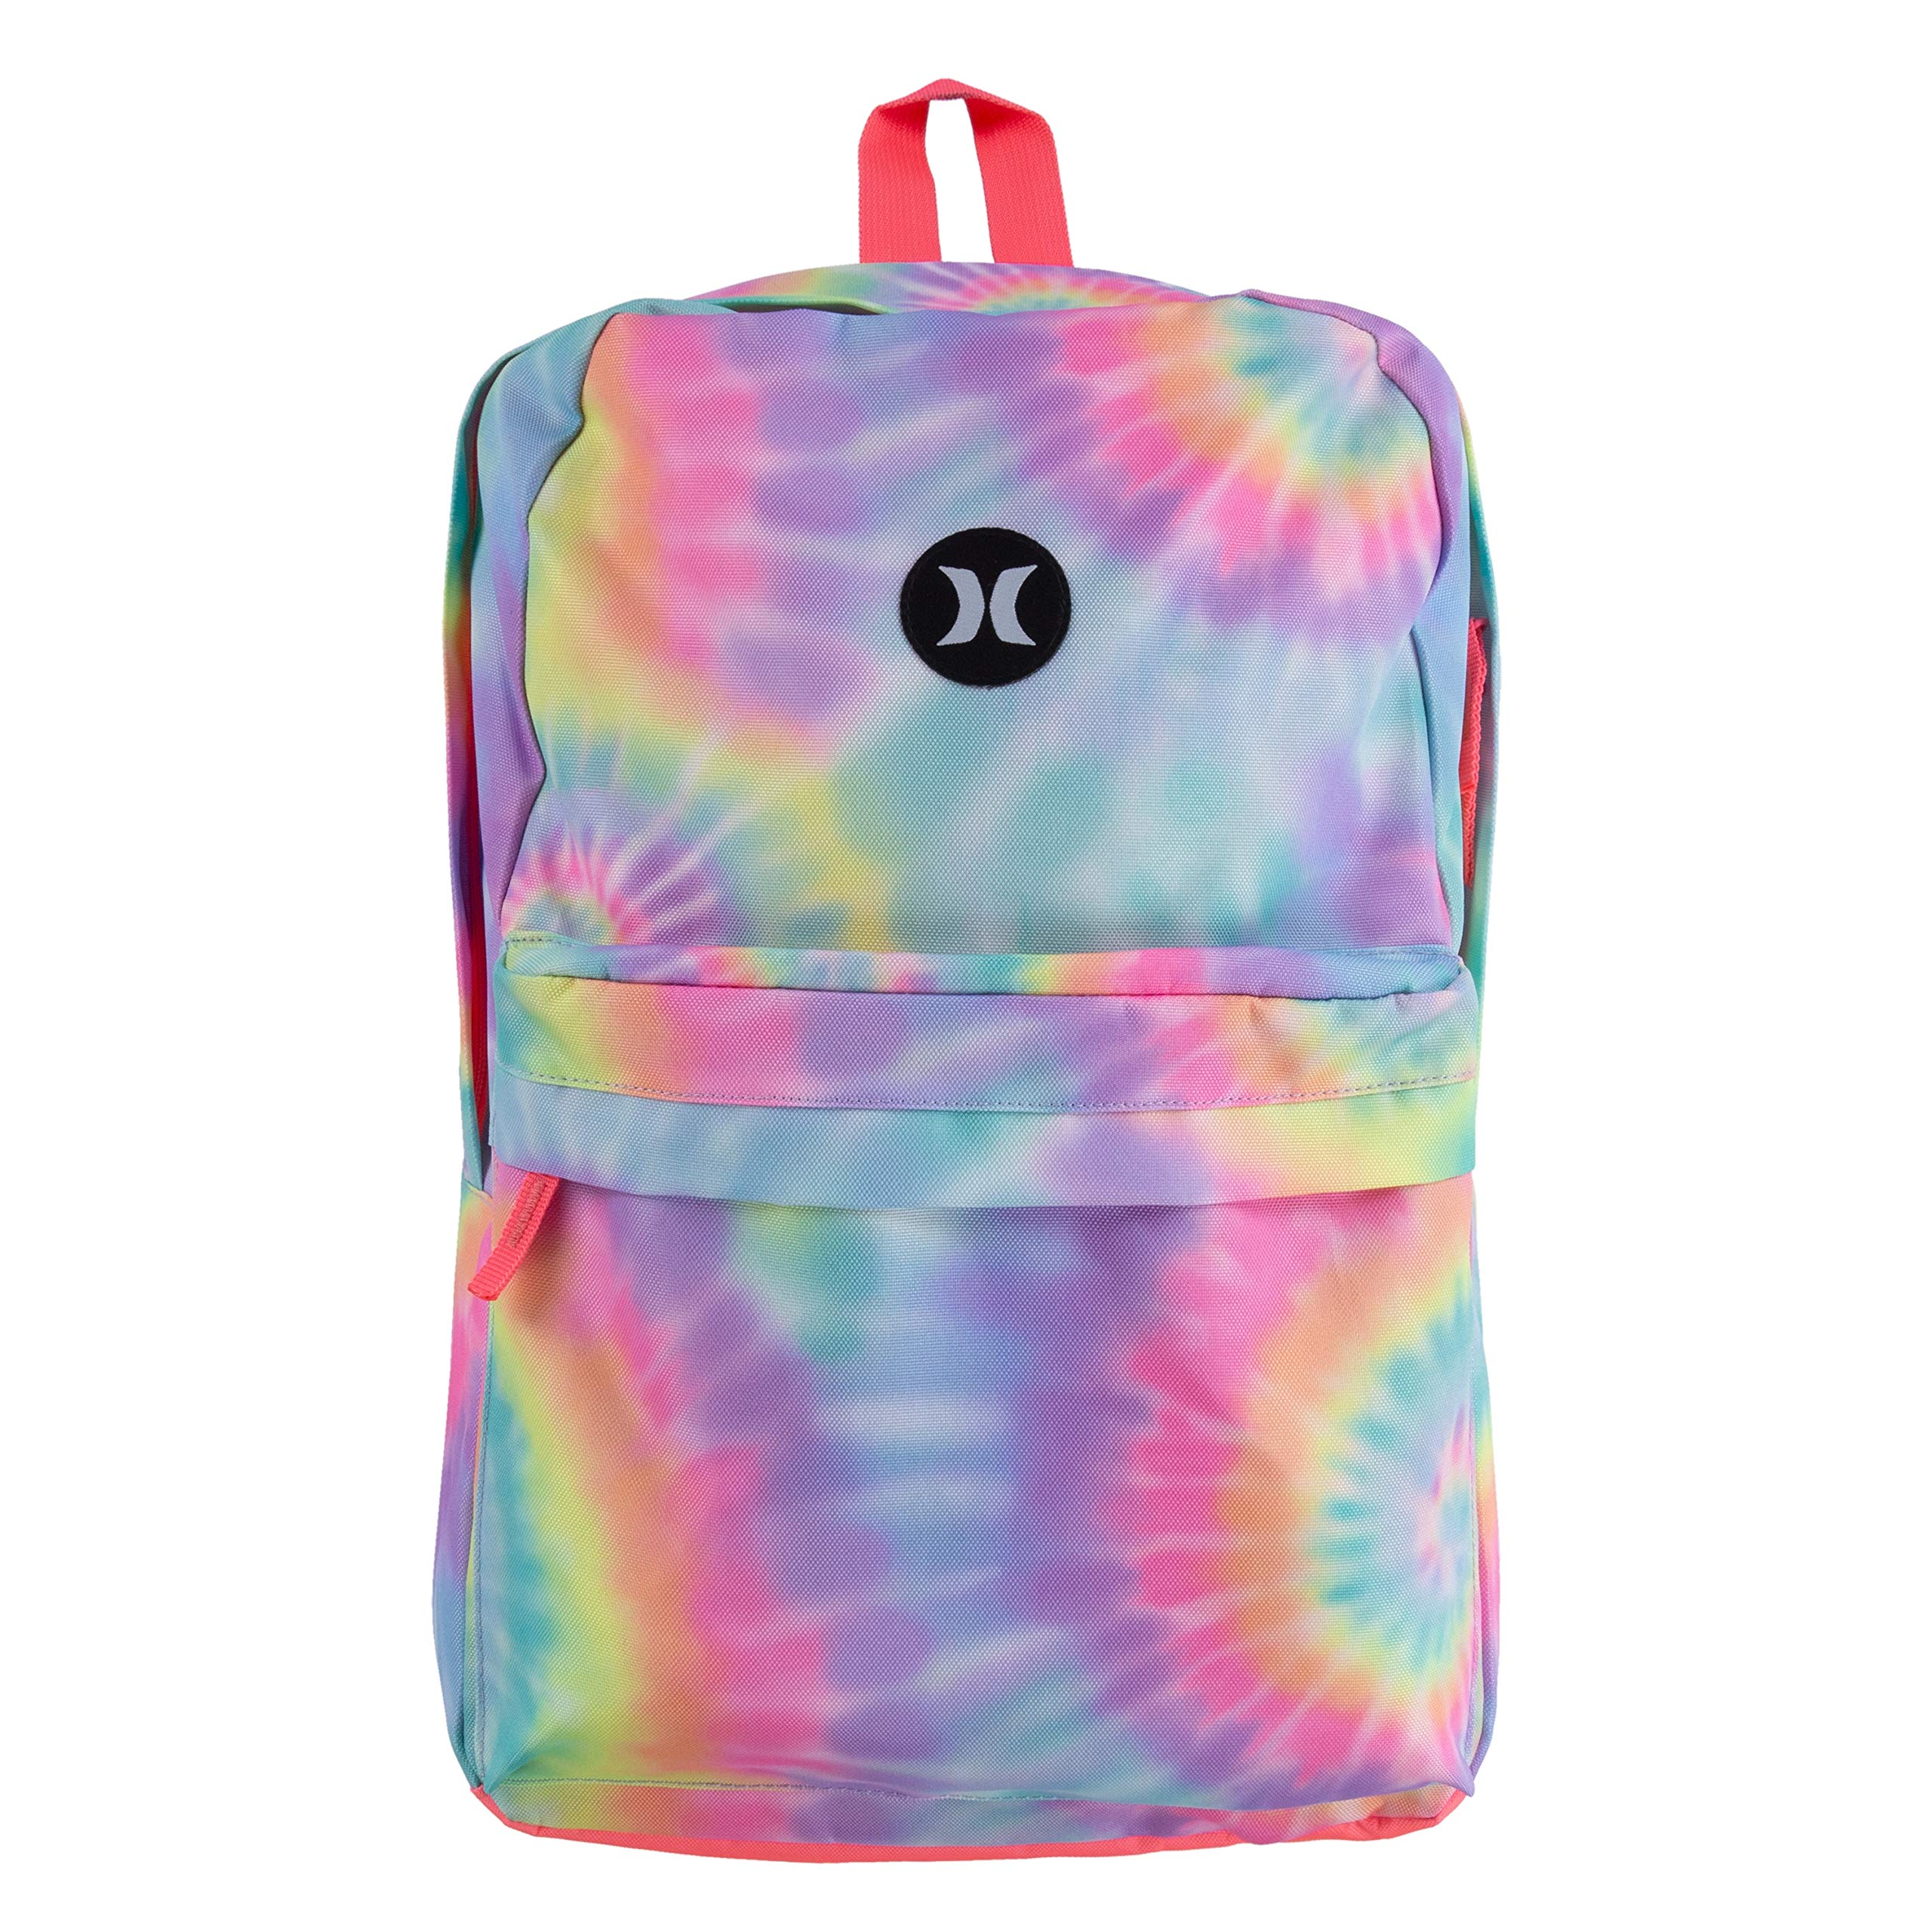 Hurley Unisex-Adults One and Only Backpack, Multicolor, Large